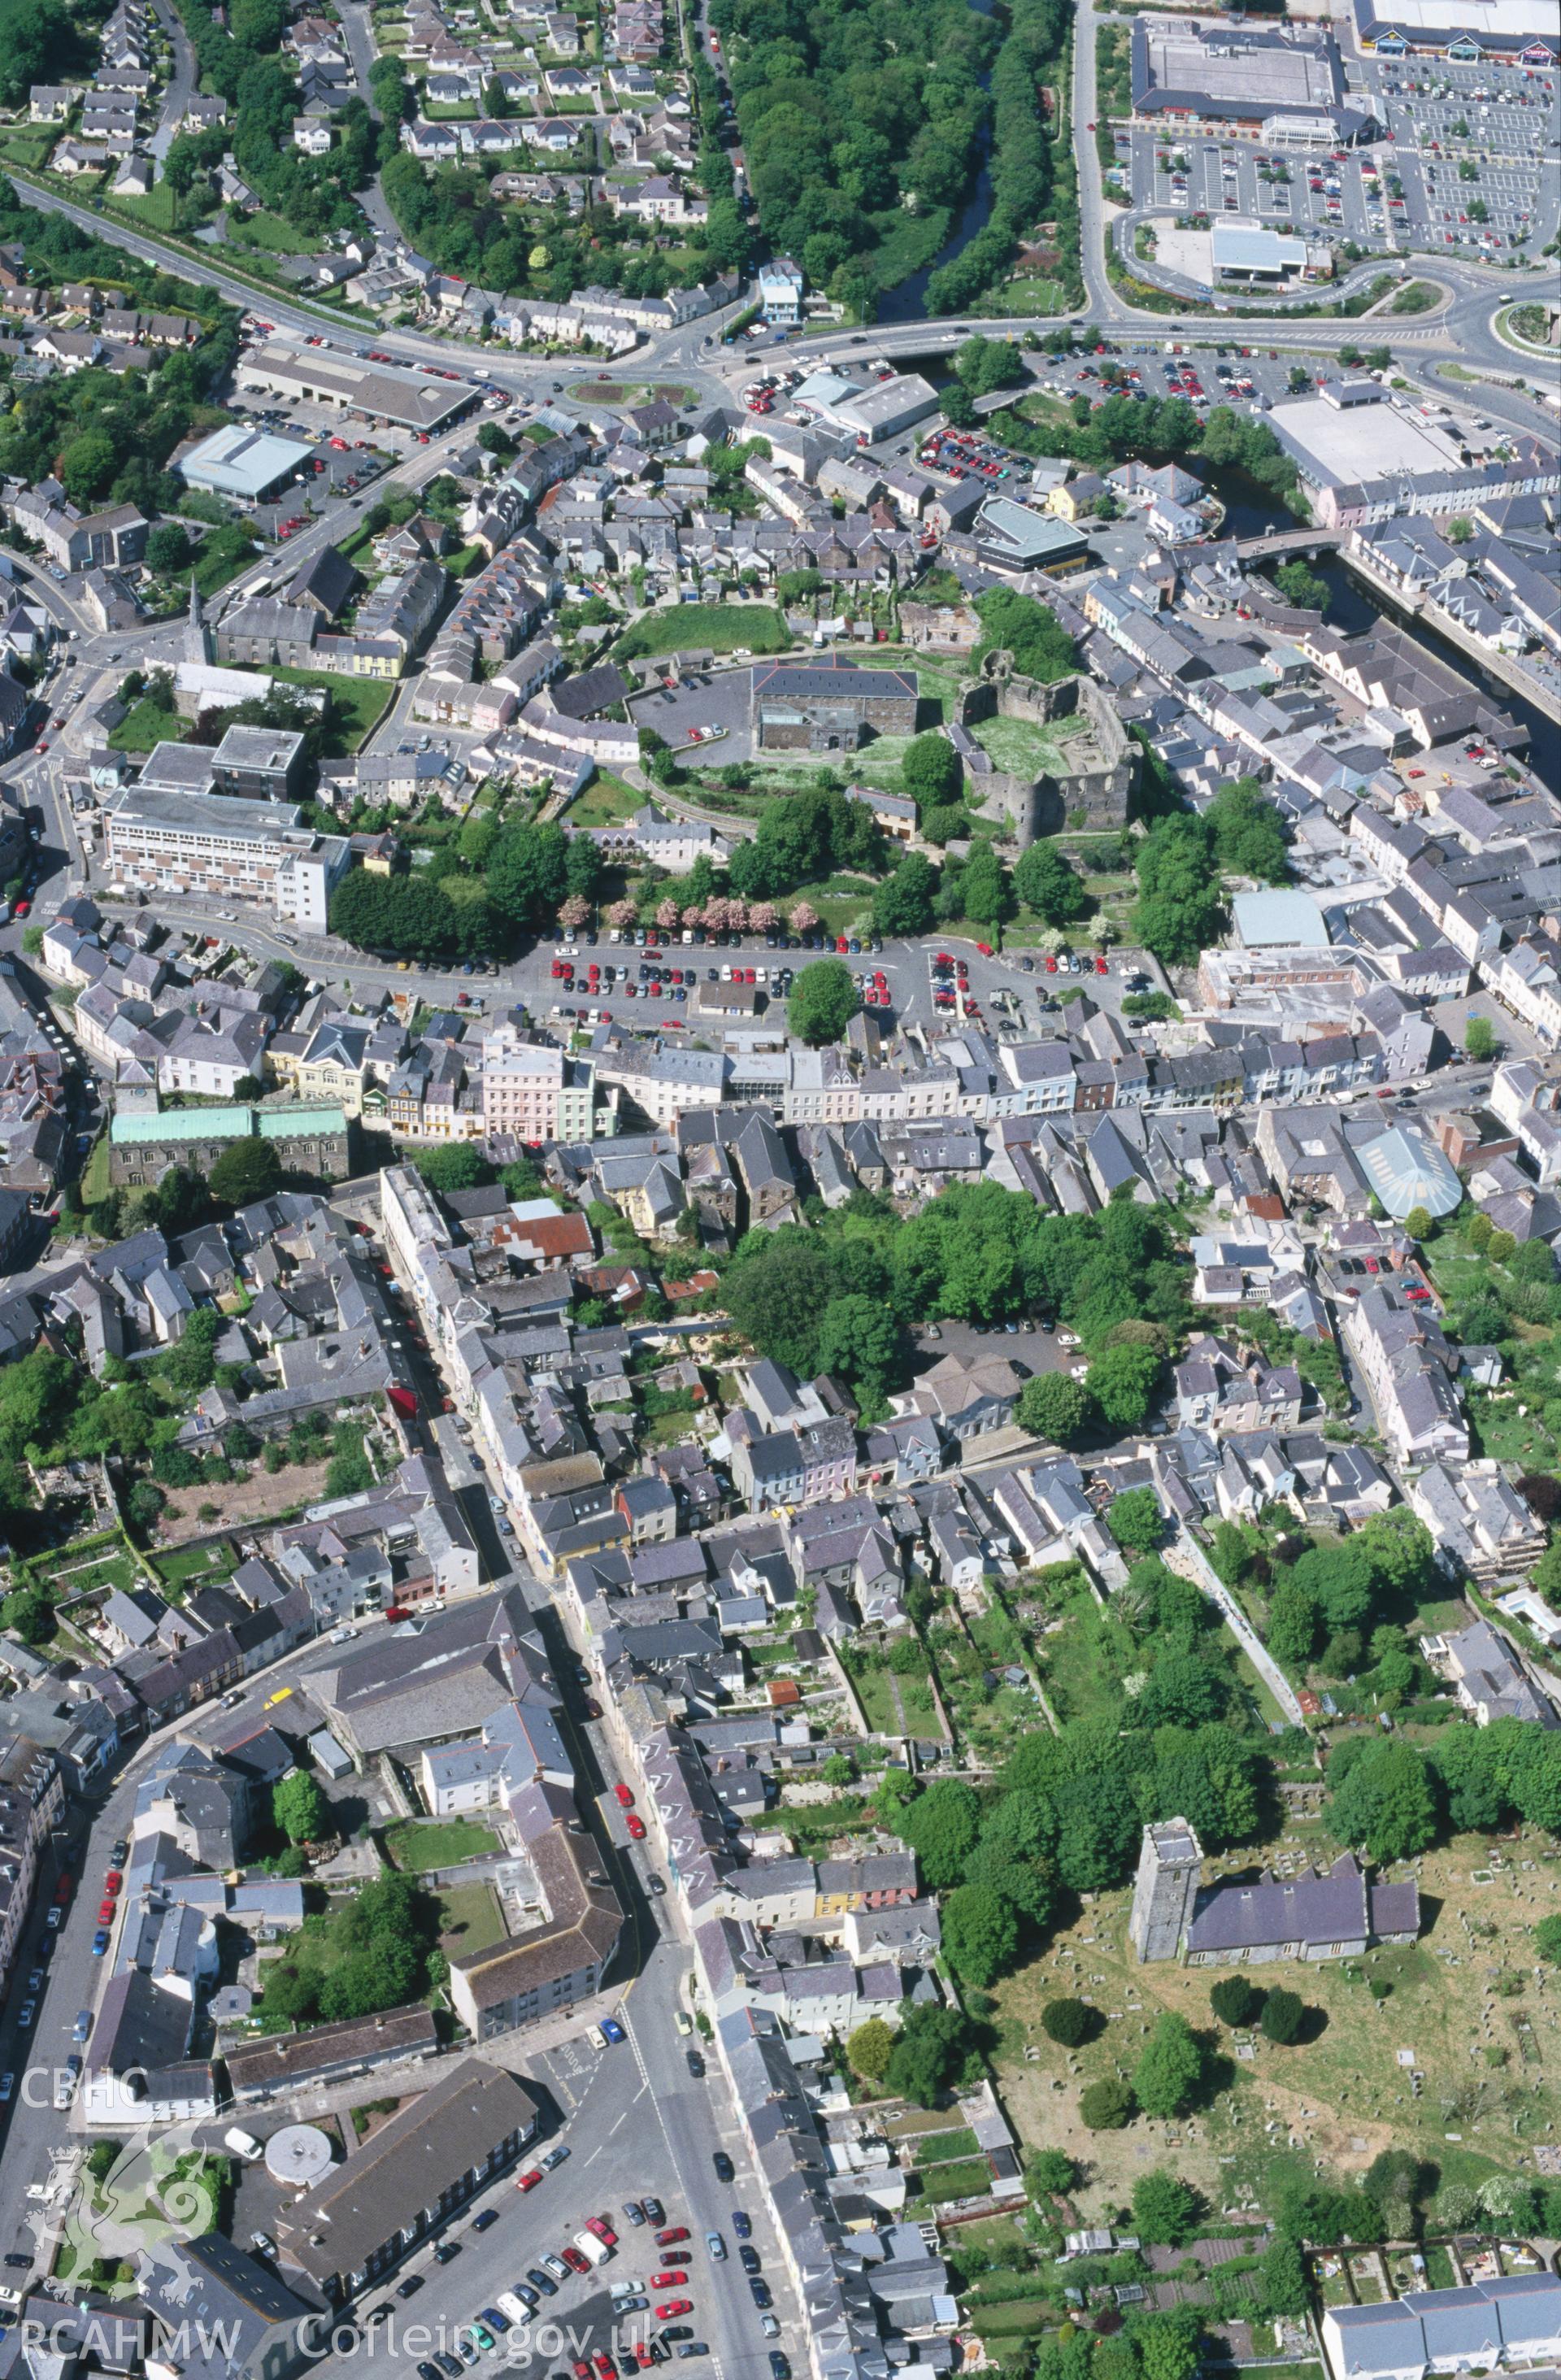 Slide of RCAHMW colour oblique aerial photograph of Haverfordwest, taken by T.G. Driver, 22/5/2000.